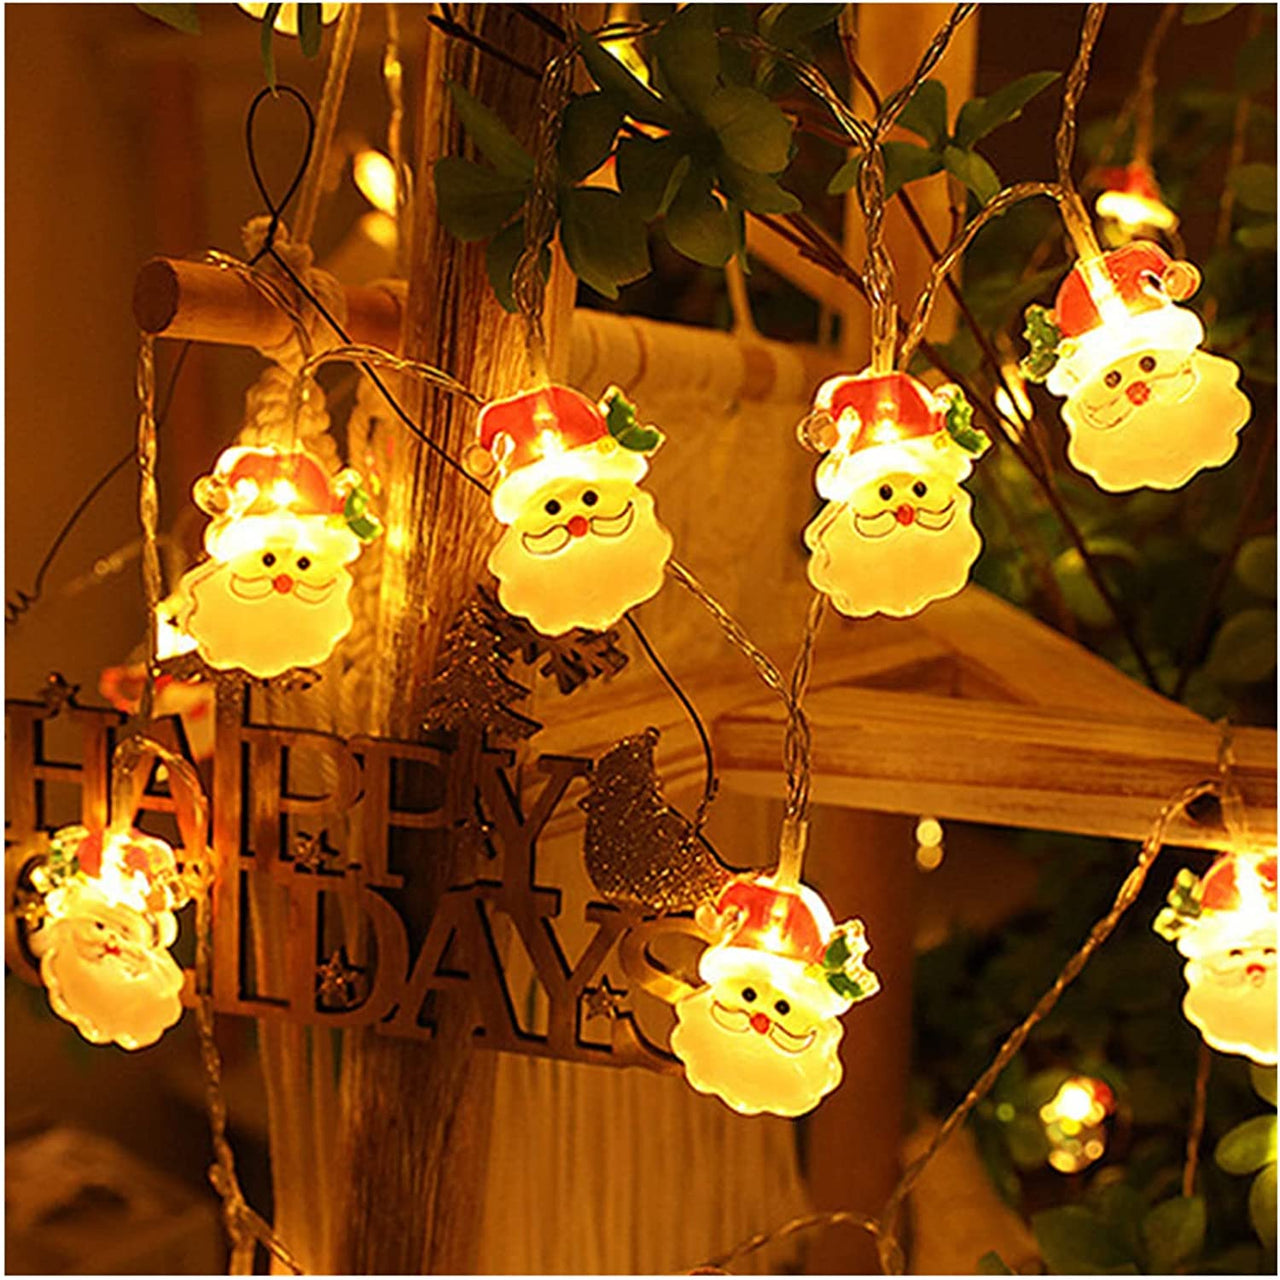 10ft 20 LEDs Christmas String Lights Waterproof Christmas Tree Santa Claus Snowman Christmas Decorations USB Operated for Home, Festival, Party Indoor Outdoor Christmas Ornaments